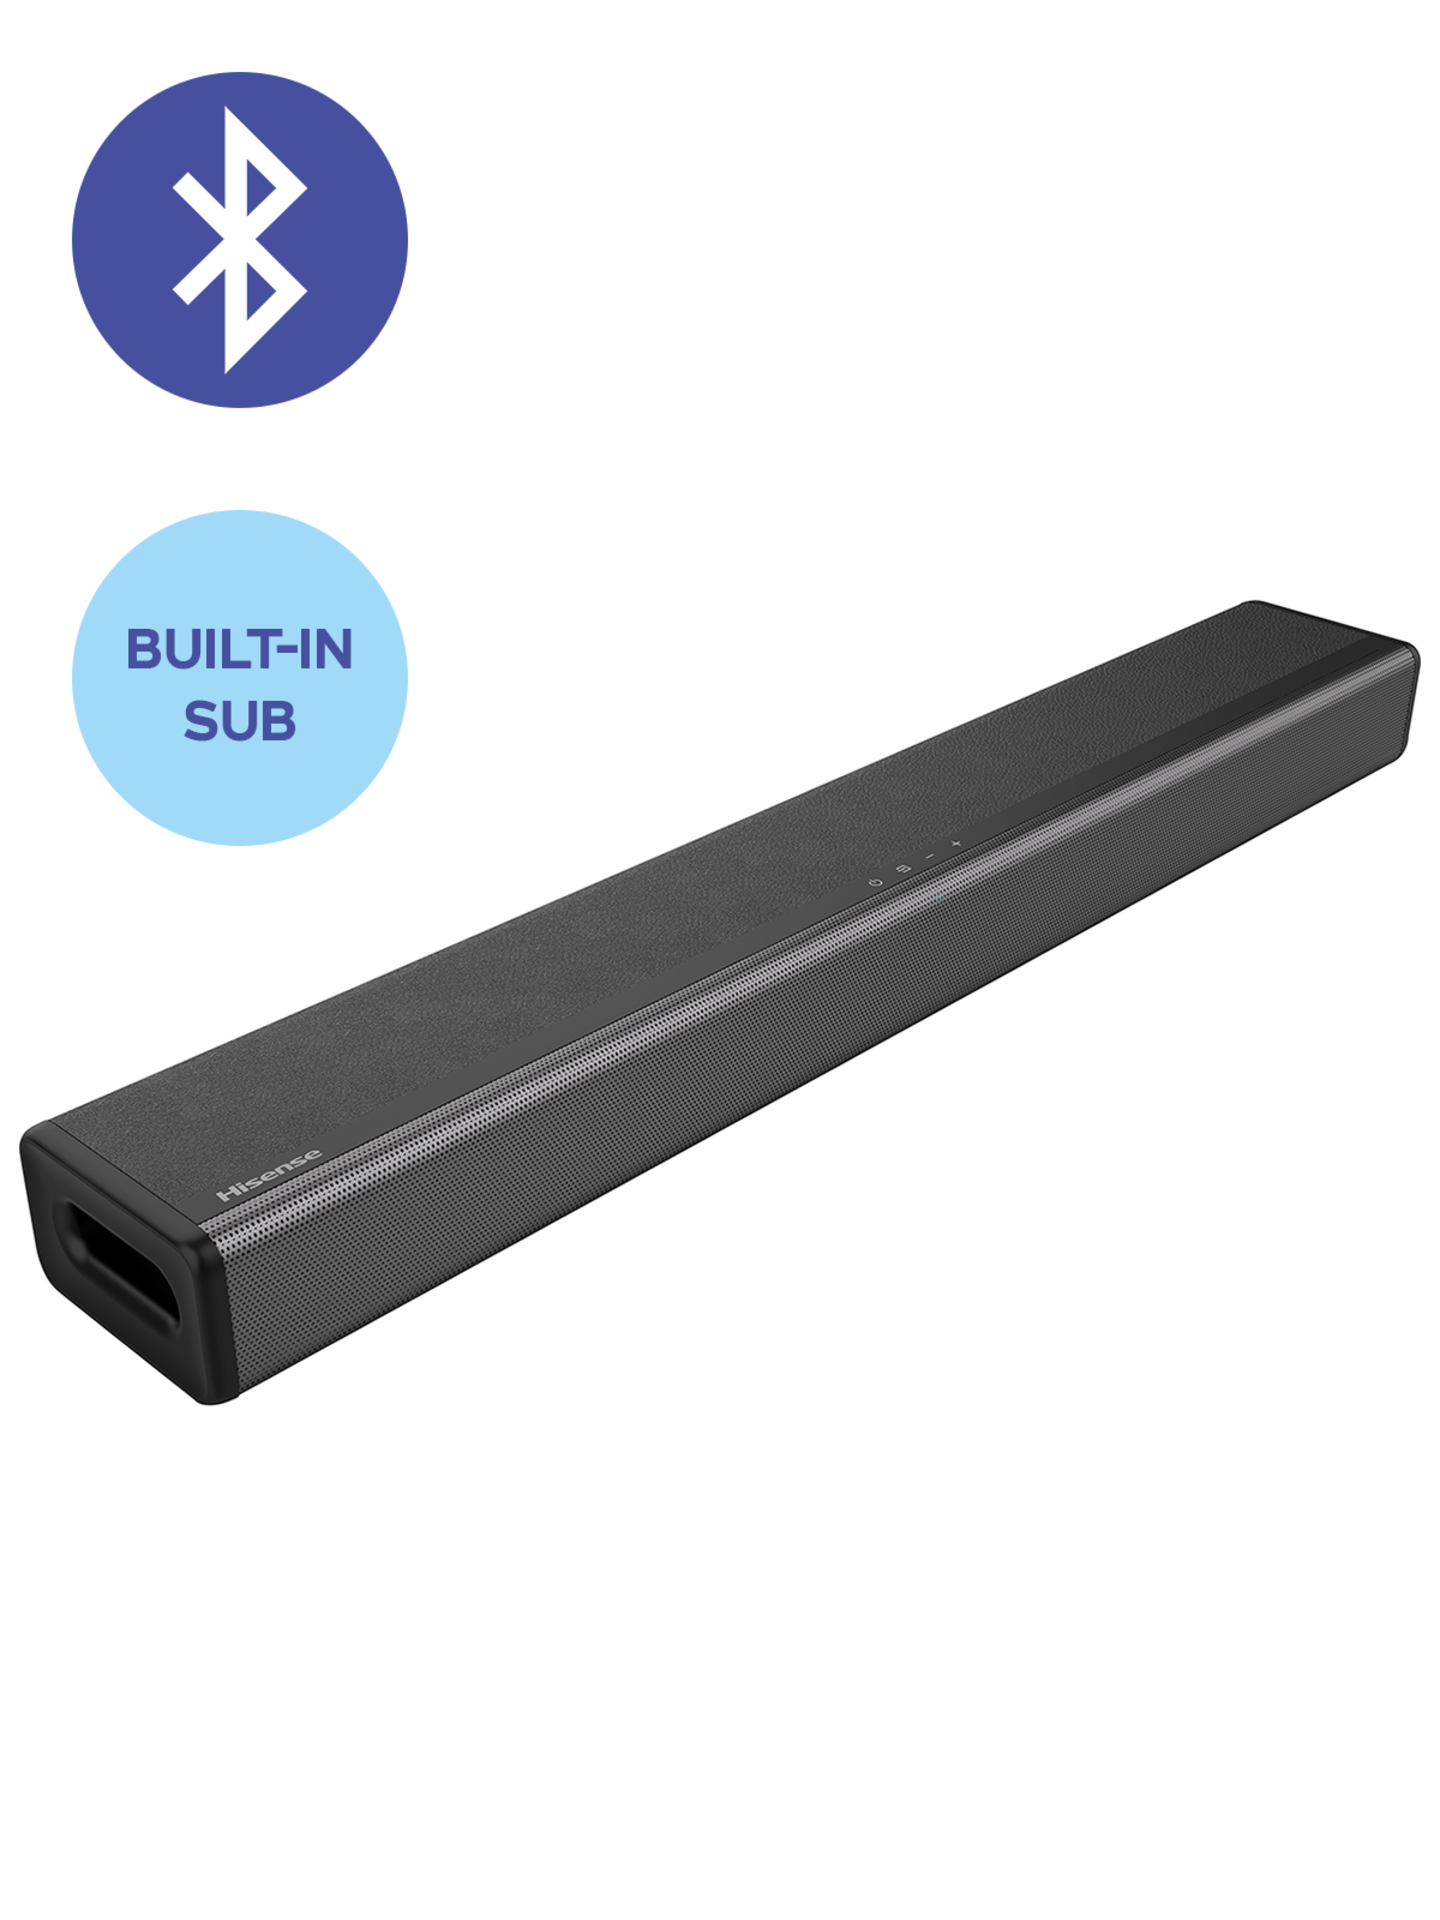 A1 PRODUCT NEW - HISENSE HS214 ALL-IN-ONE SOUNDBAR WITH SUB AND BLUETOOTH IN SILVER - RRP Ã‚Â£129